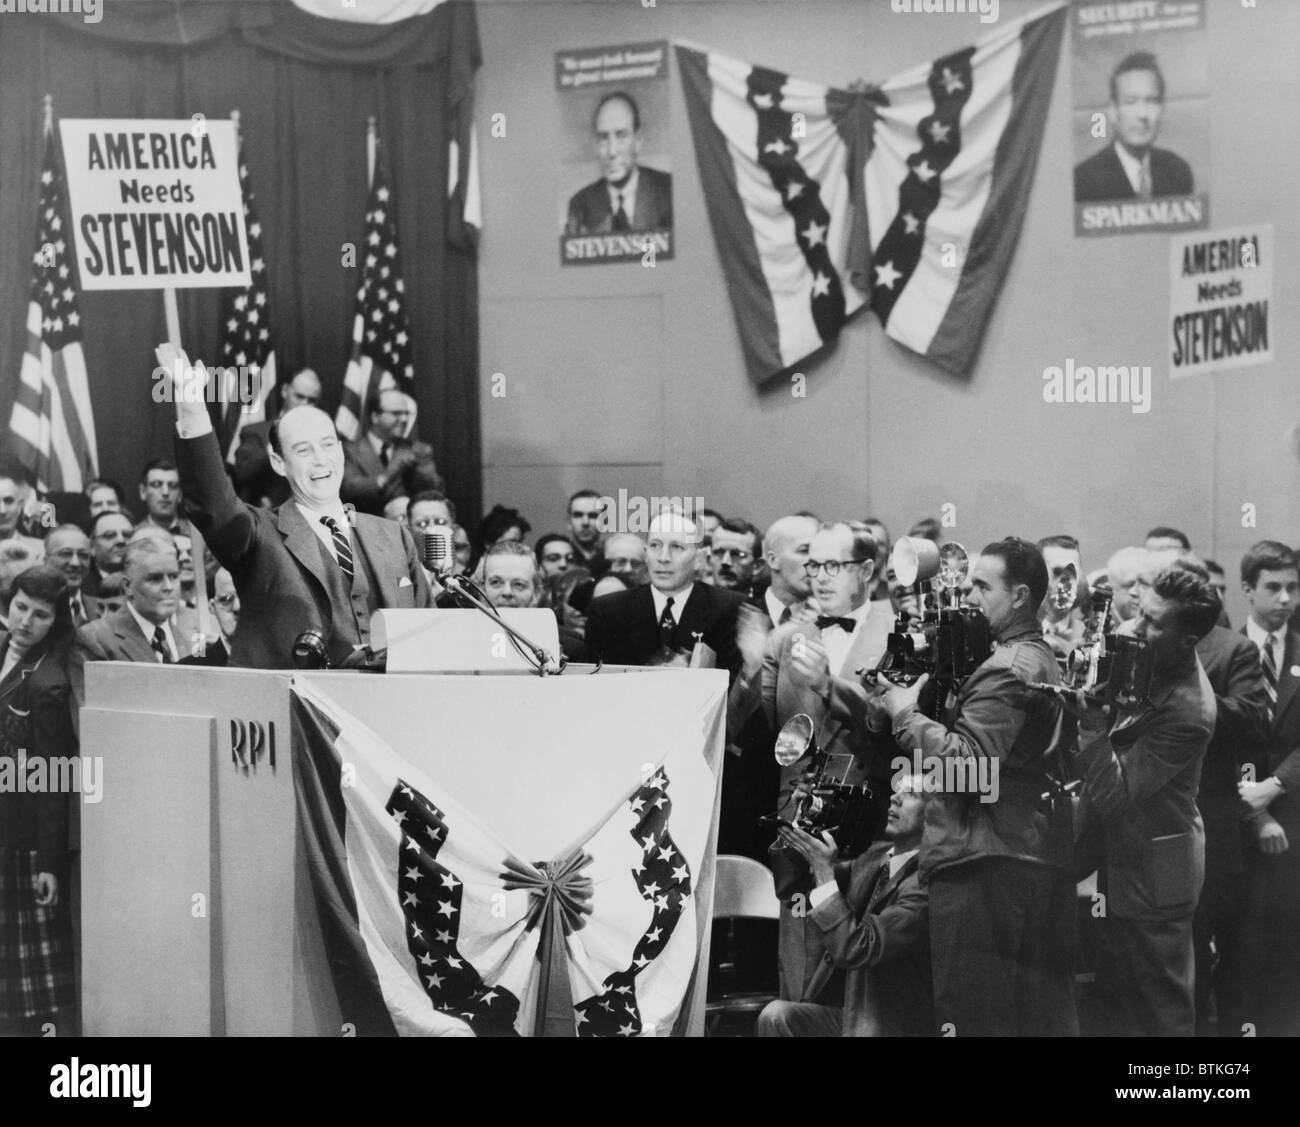 Democratic candidate for President, Adlai E. Stevenson, waving to crowd at Rensselaer Polytechnic Institute, Troy, N.Y., during Stock Photo